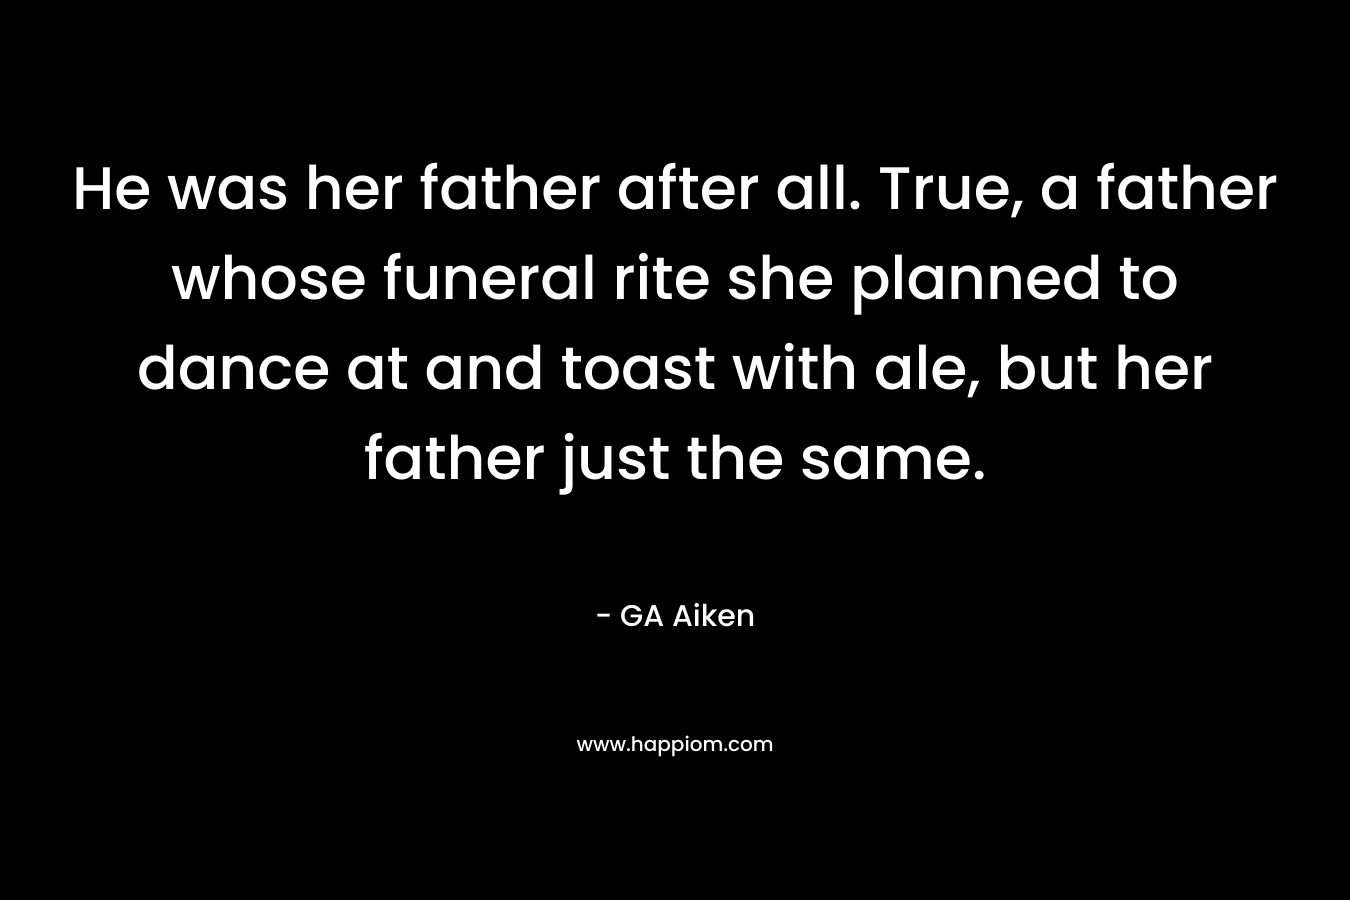 He was her father after all. True, a father whose funeral rite she planned to dance at and toast with ale, but her father just the same. – GA Aiken